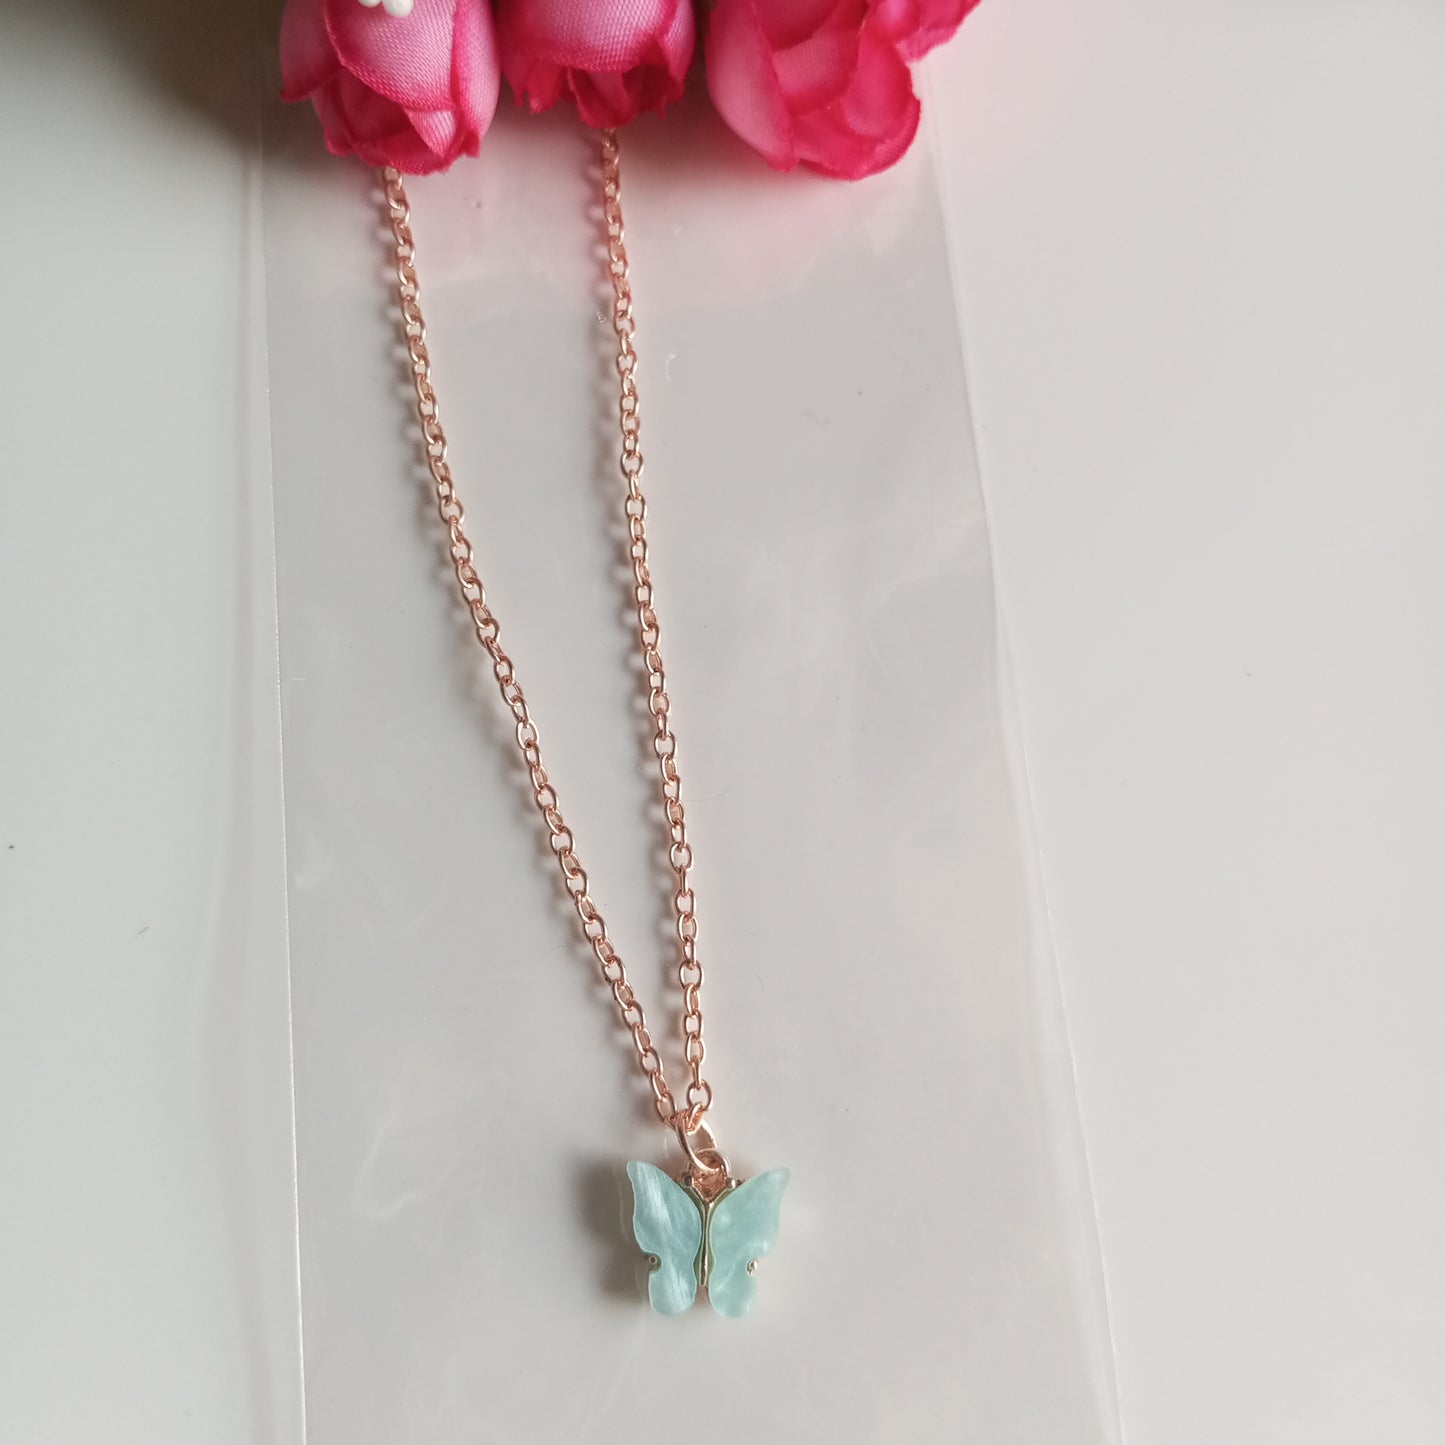 Chain with Pendant- Mint Blue Butterfly